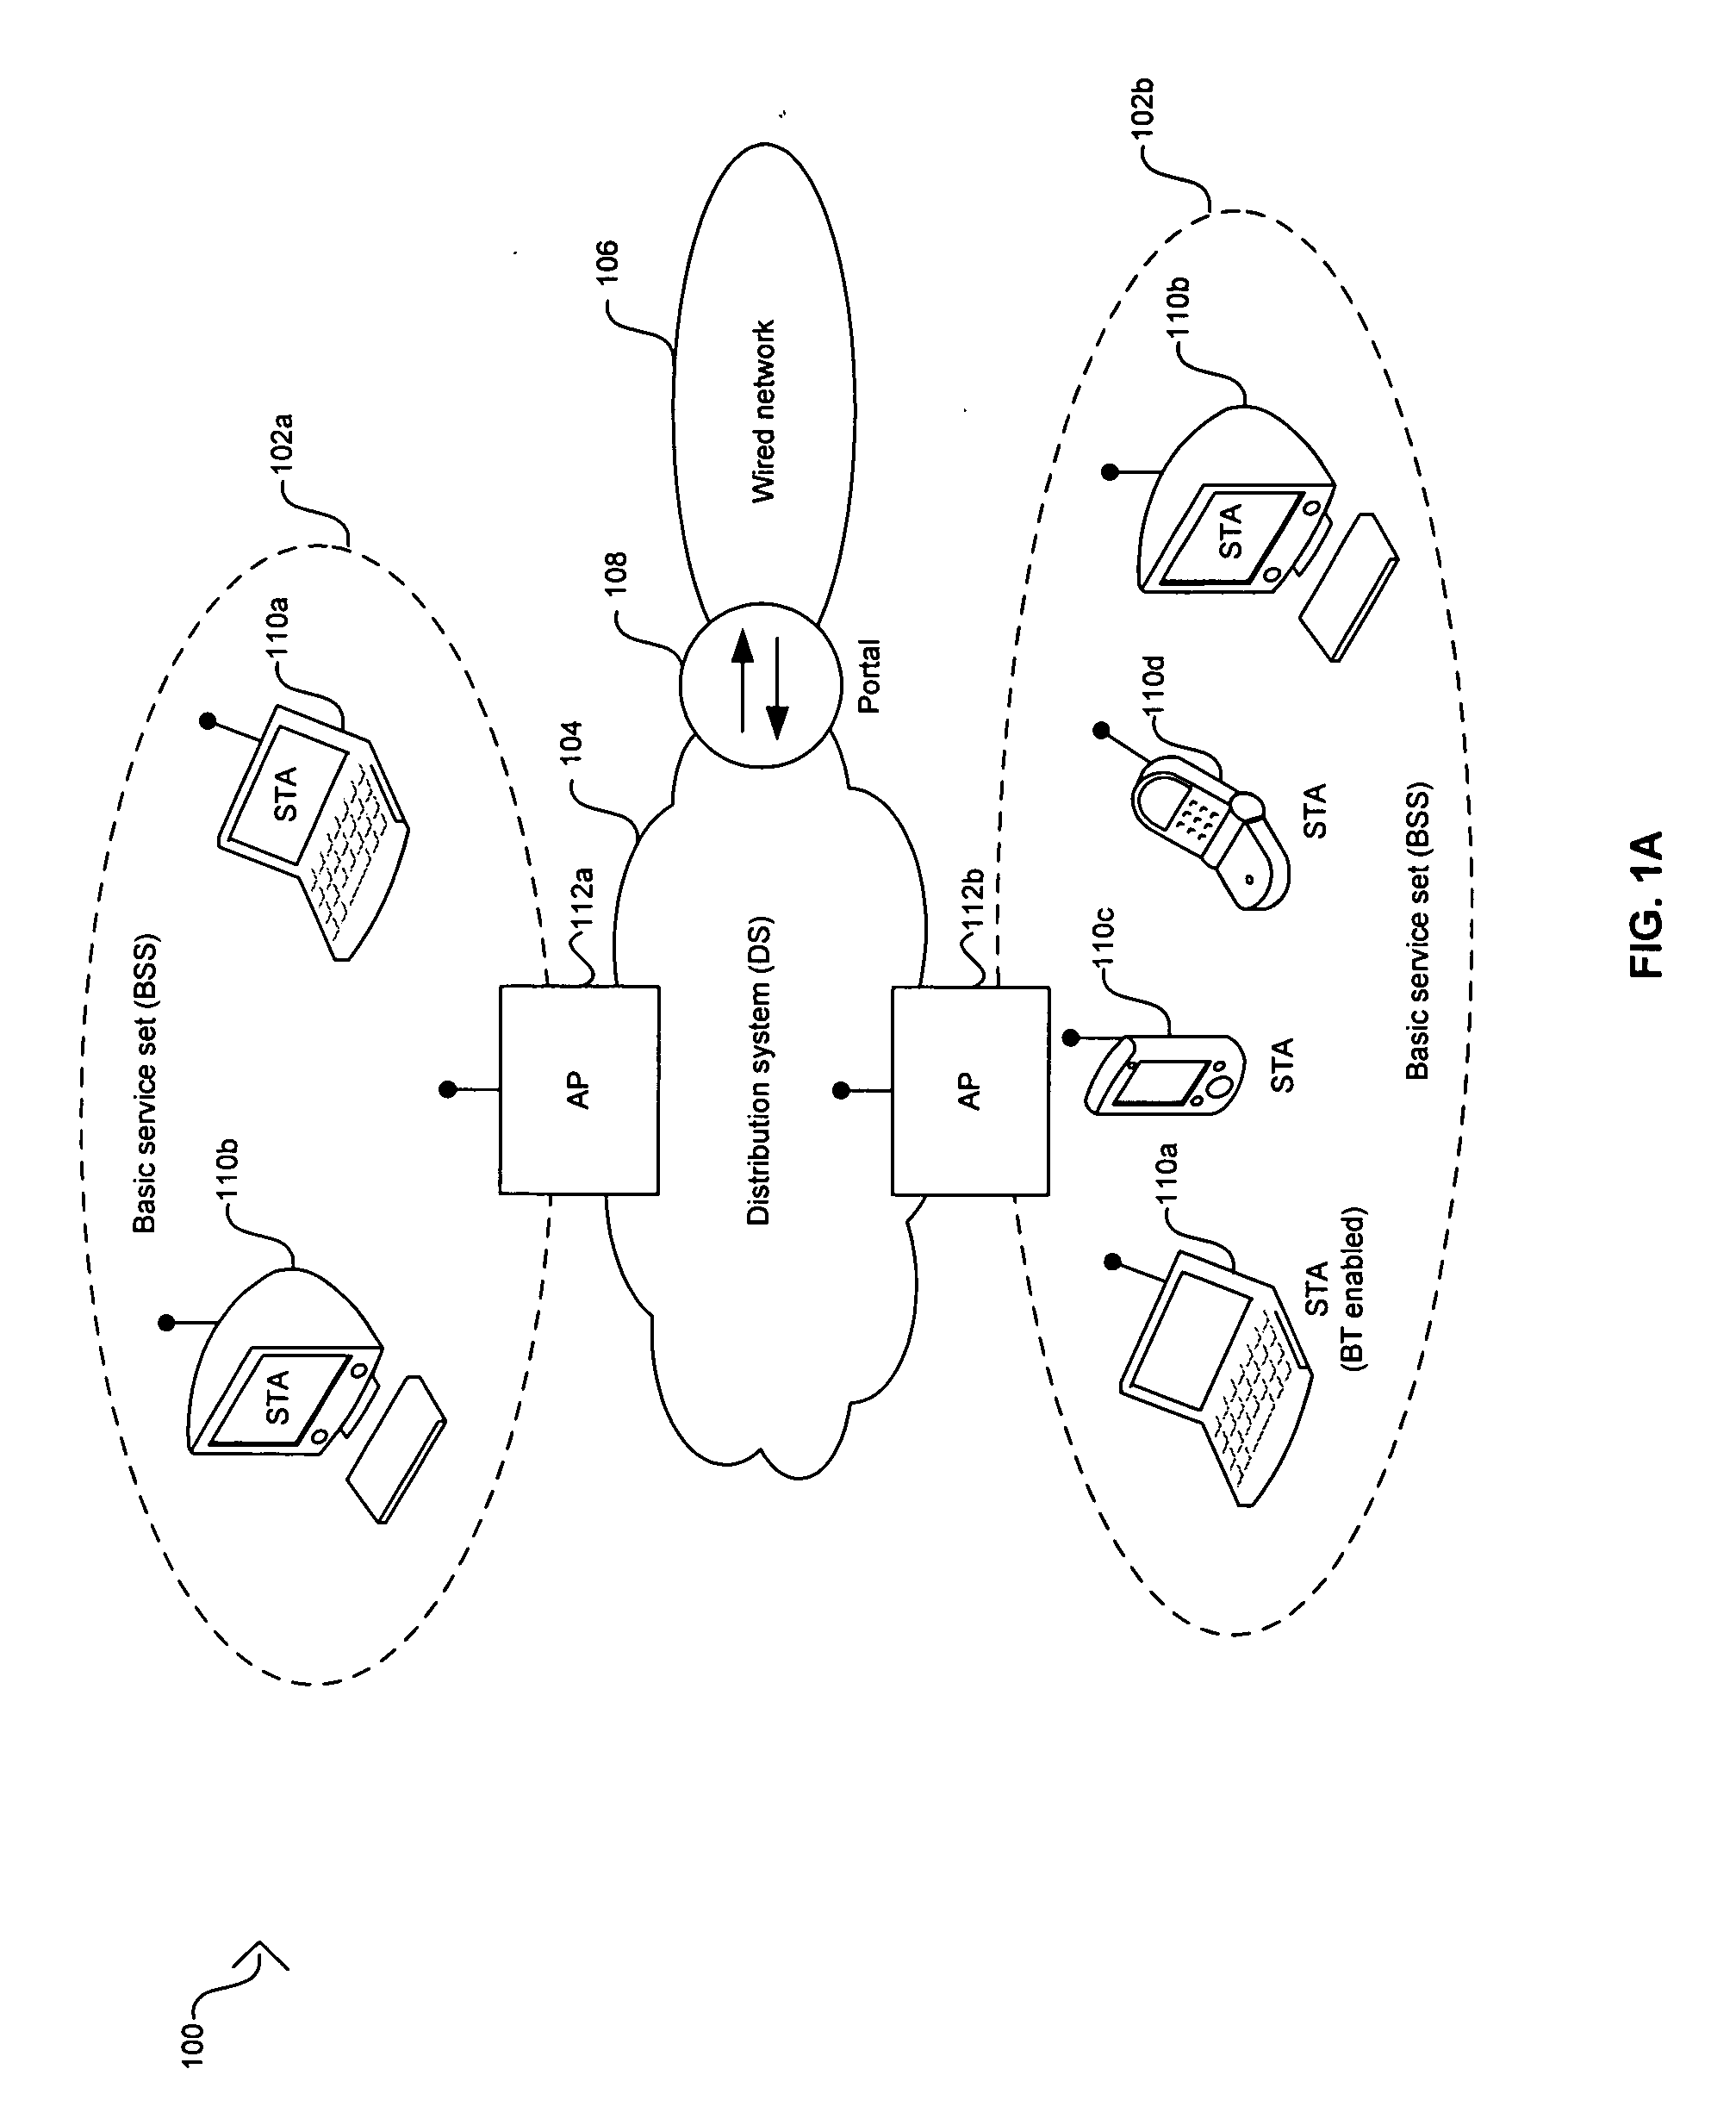 Method and system for redundancy-based decoding of voice content in a wireless LAN system